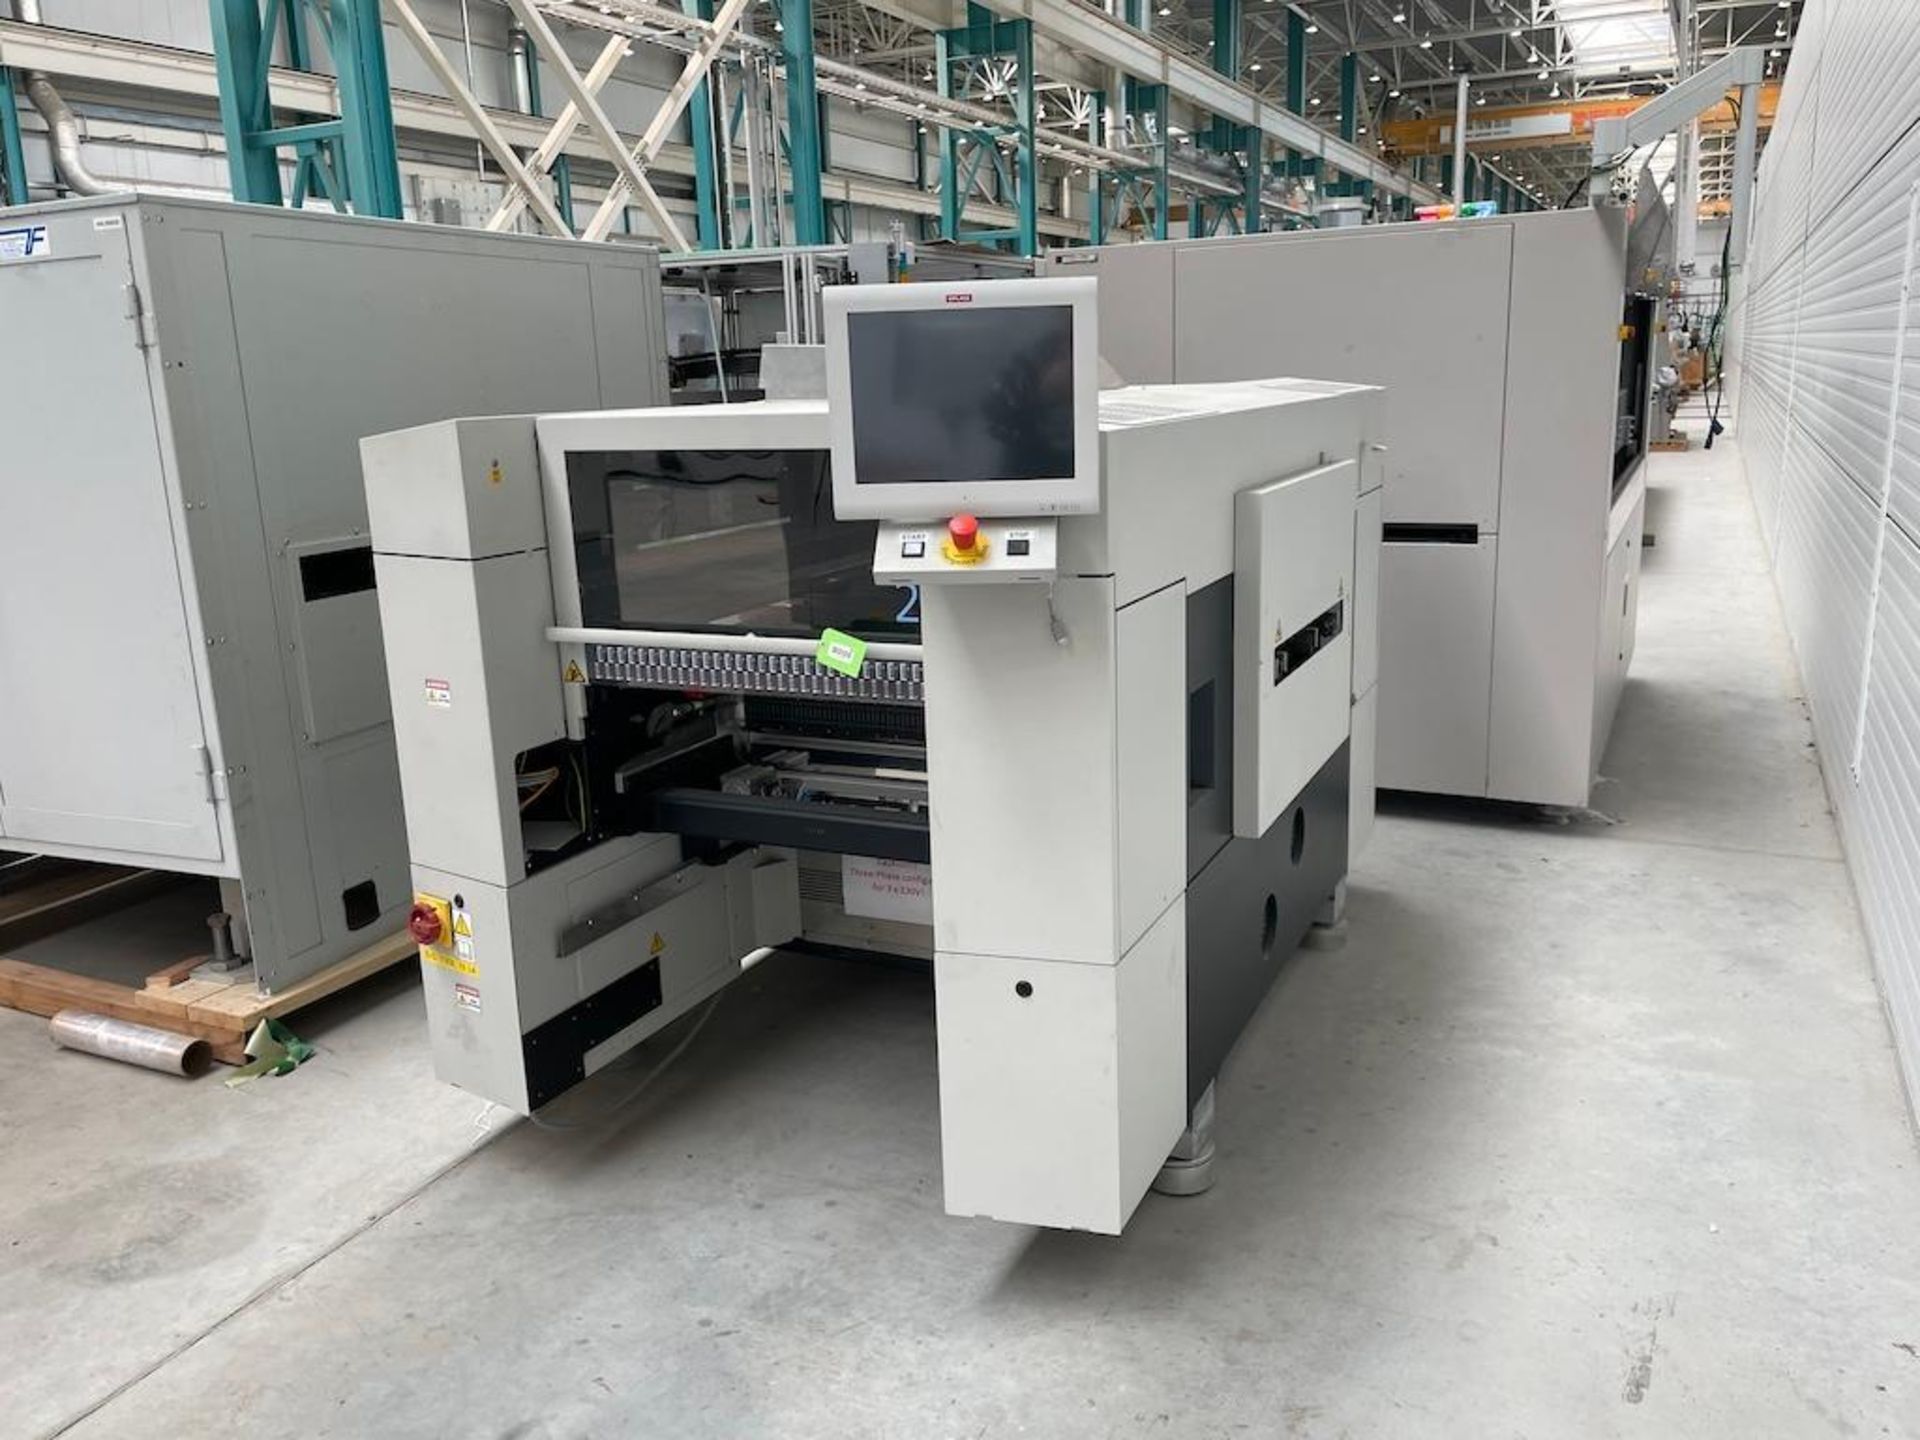 2012 ASM ASSEBLY SYSTEMS, TYPE SIPLACE SX1/SX2, SN K665G, 60 STATION SCHNEEBERGER, MATR NR 590 200 3